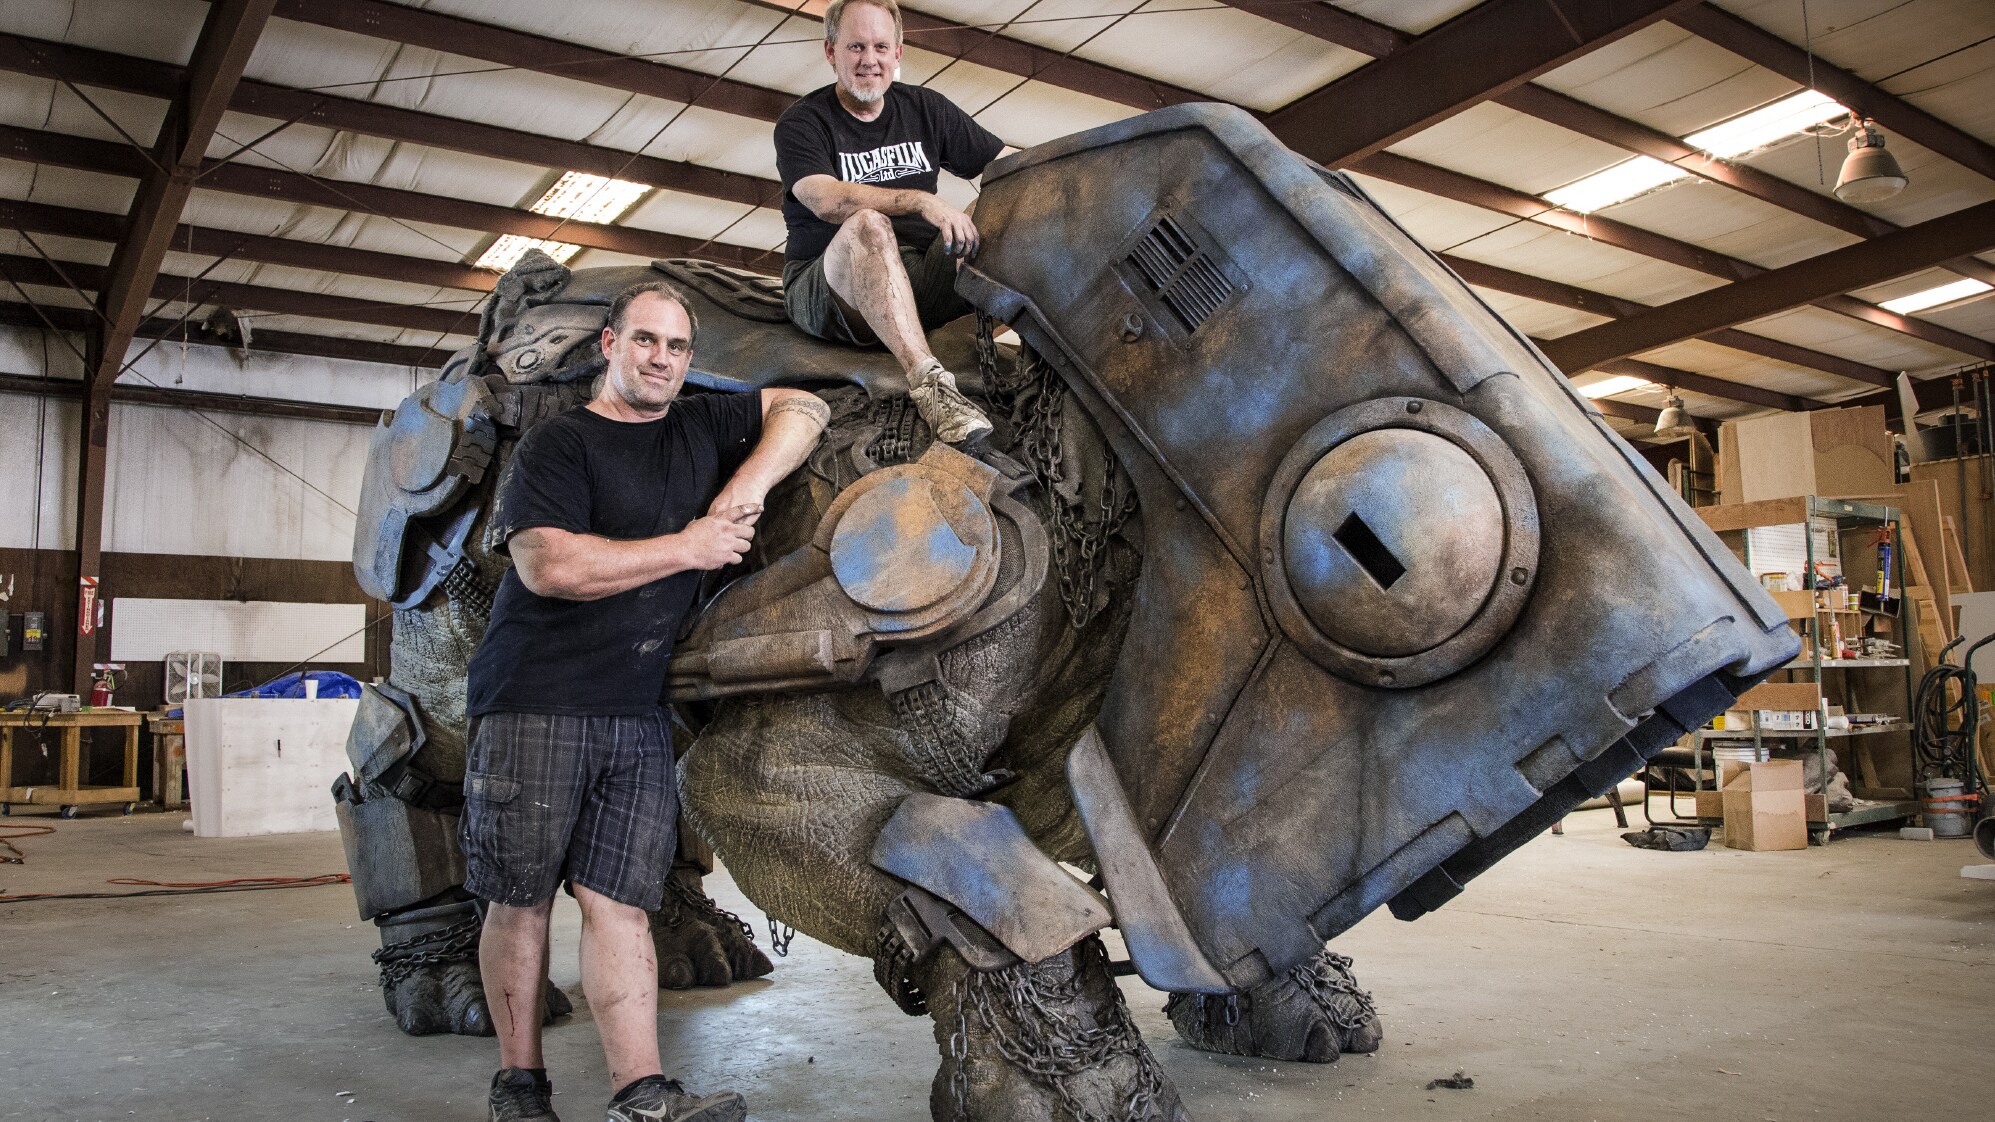 Monster Masters: How Star Wars Fans Made an Amazing, Life-Size Luggabeast Sculpture